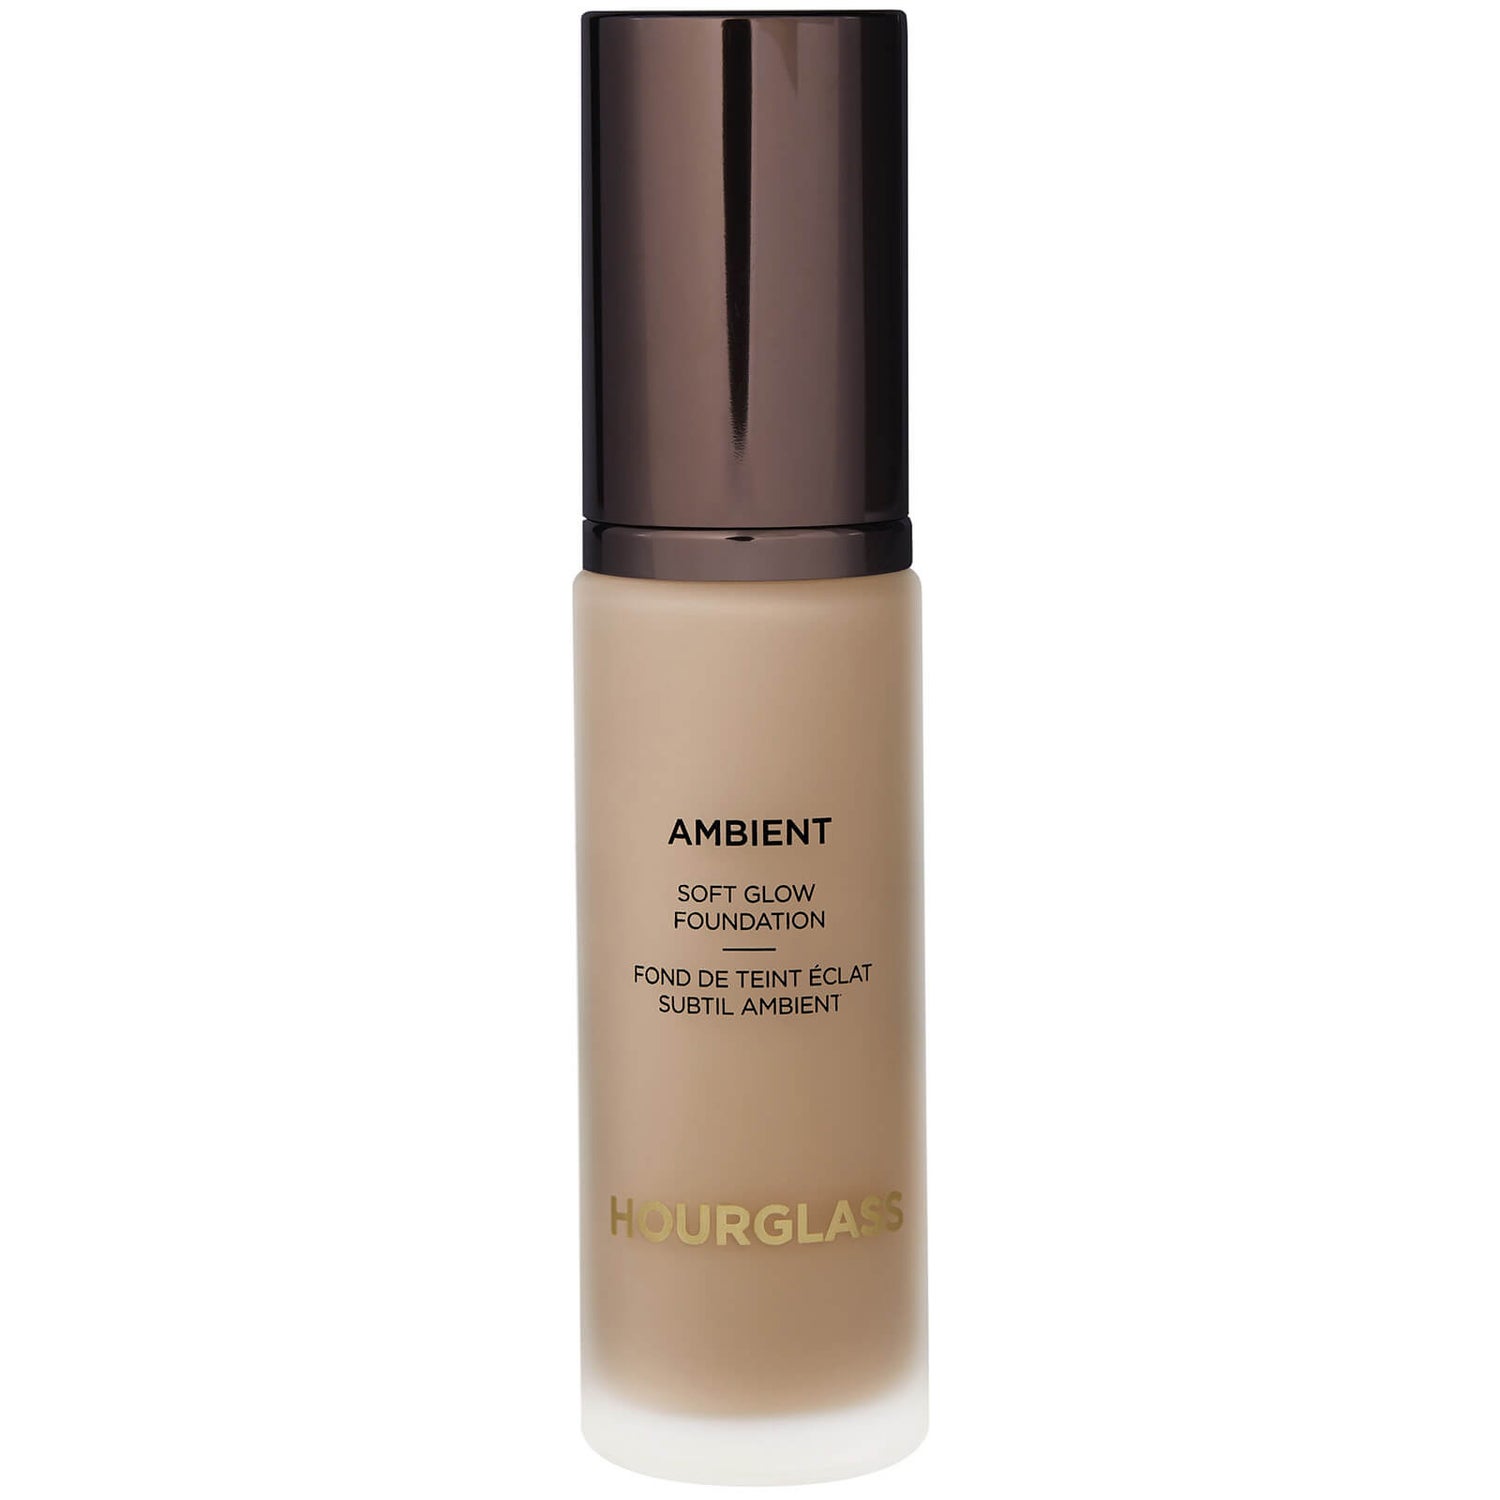 Hourglass Ambient Soft Glow Foundation 30ml (Various Shades)